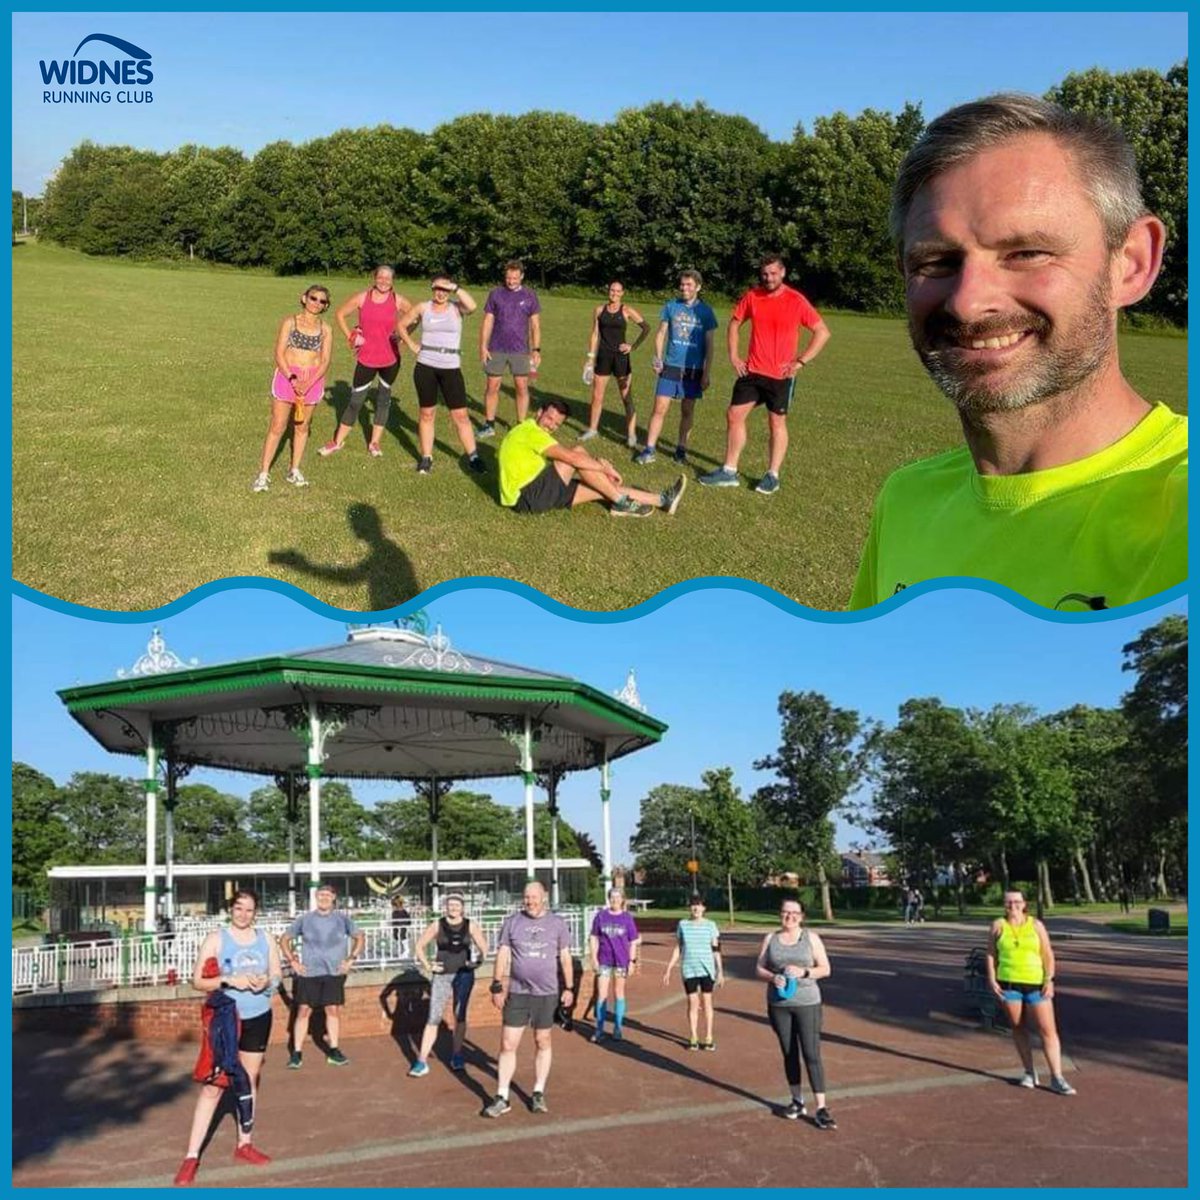 Great dedication on show from our Tuesday interval groups last night! Beach weather but no lounging about for this crew - plenty of speedy running from all 👍 We rest & go again with muster runs on Thursday 💪 #widnesrunningclub #widnes #halton #intervaltraining #intervals